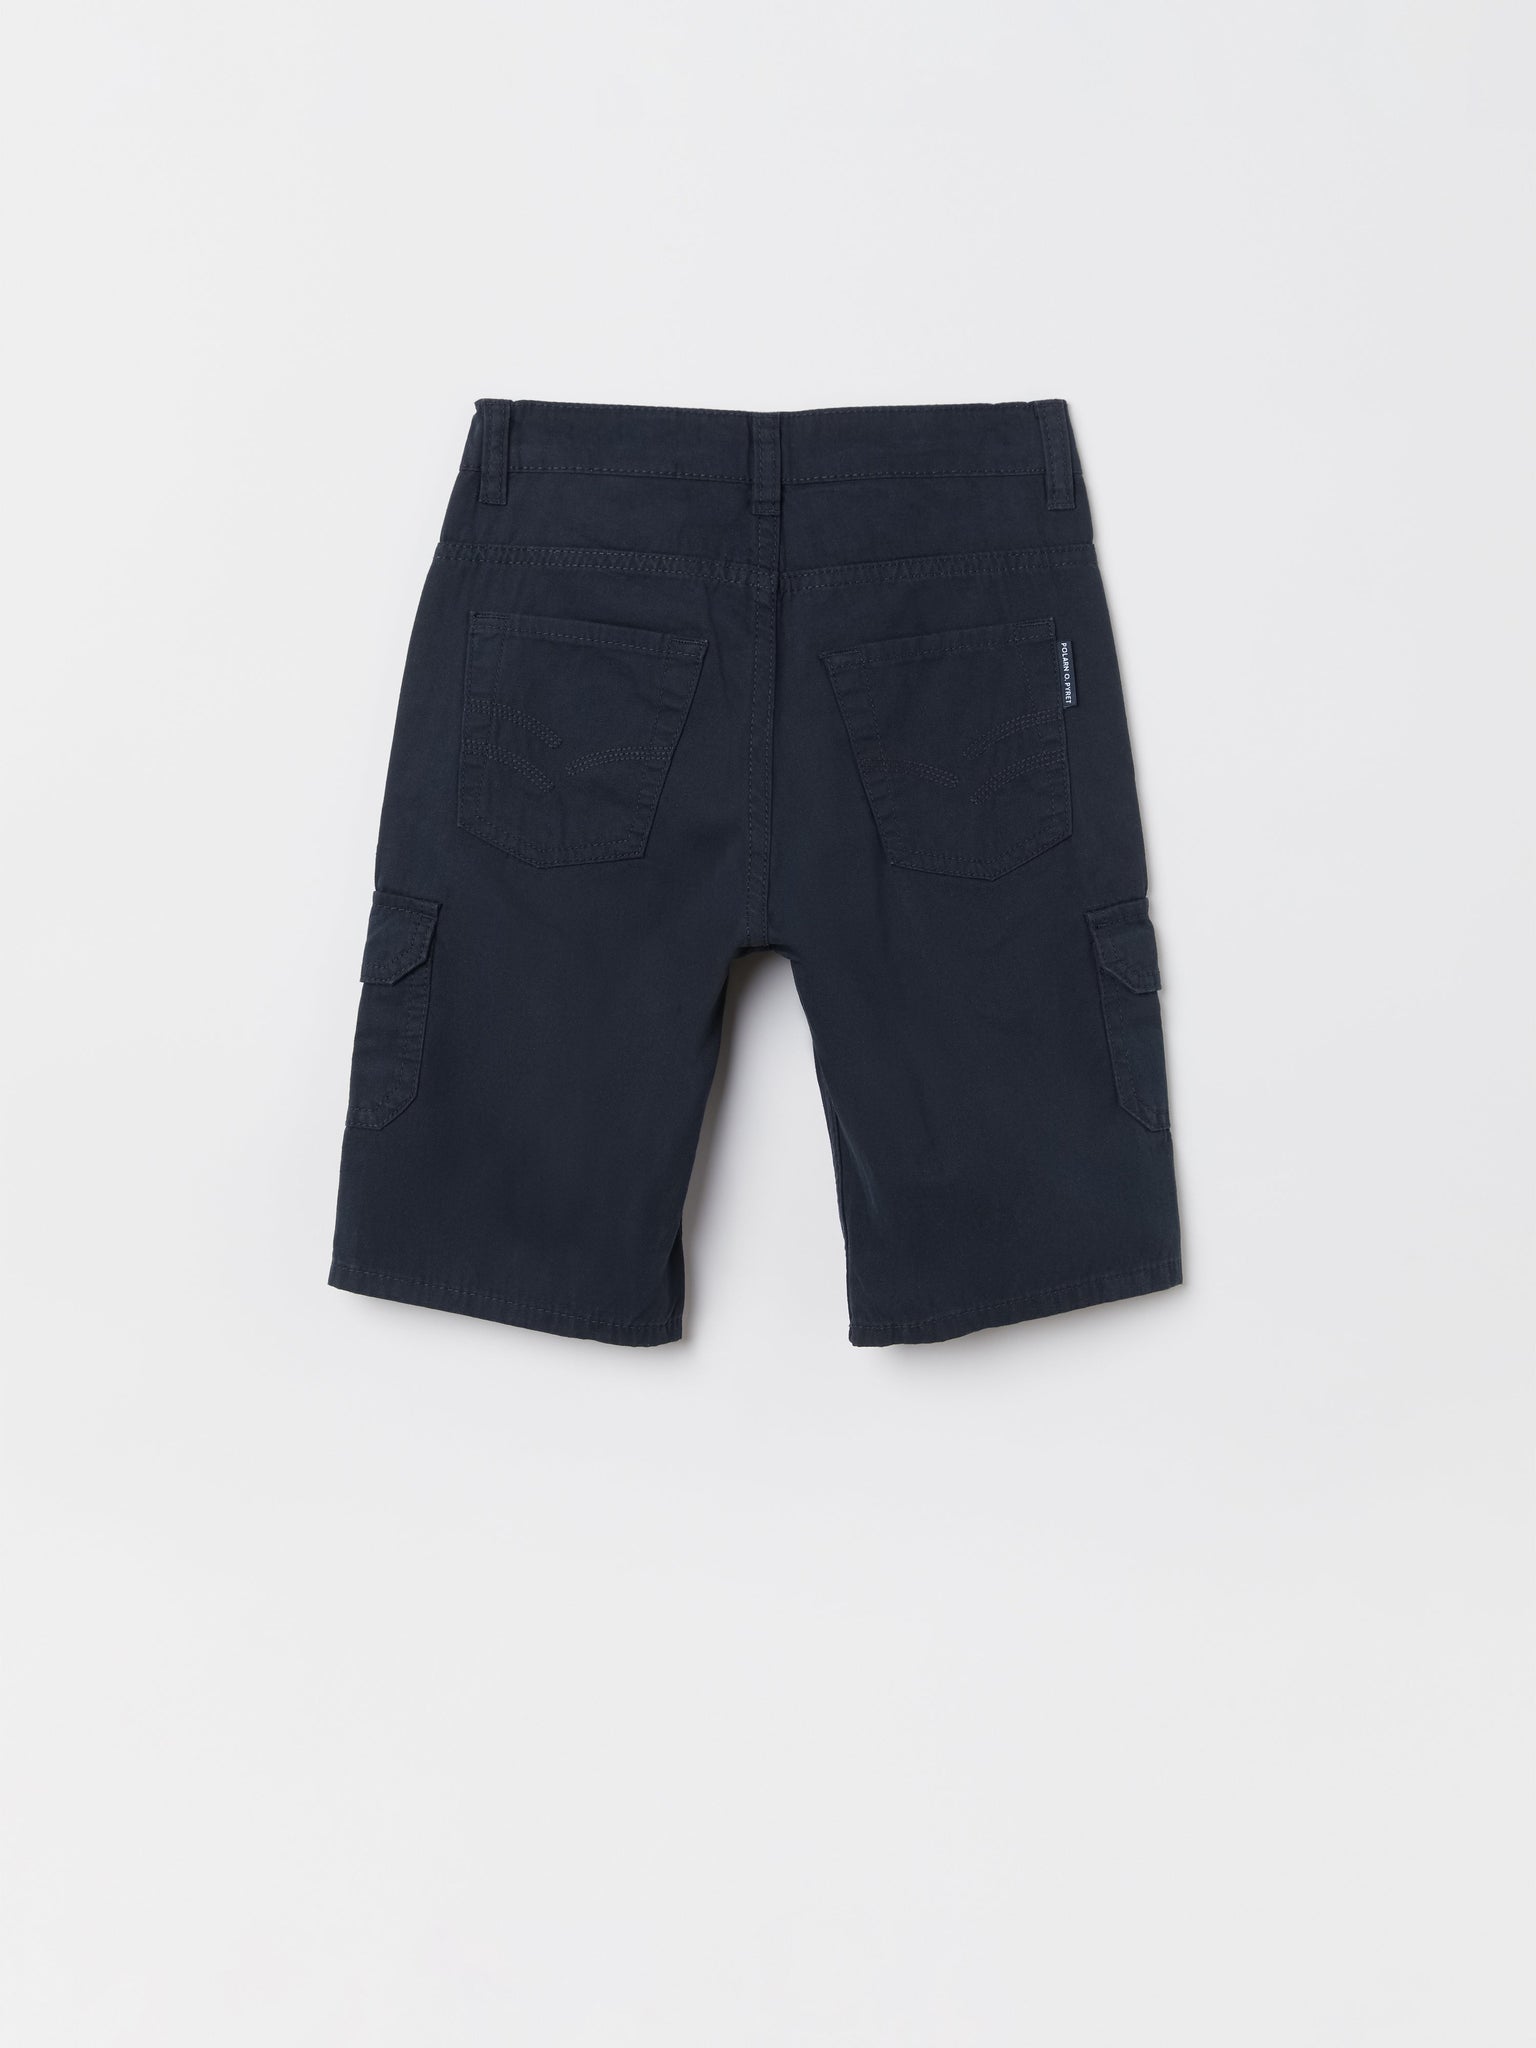 Organic Kids Cargo Shorts from the Polarn O. Pyret kidswear collection. Ethically produced kids clothing.